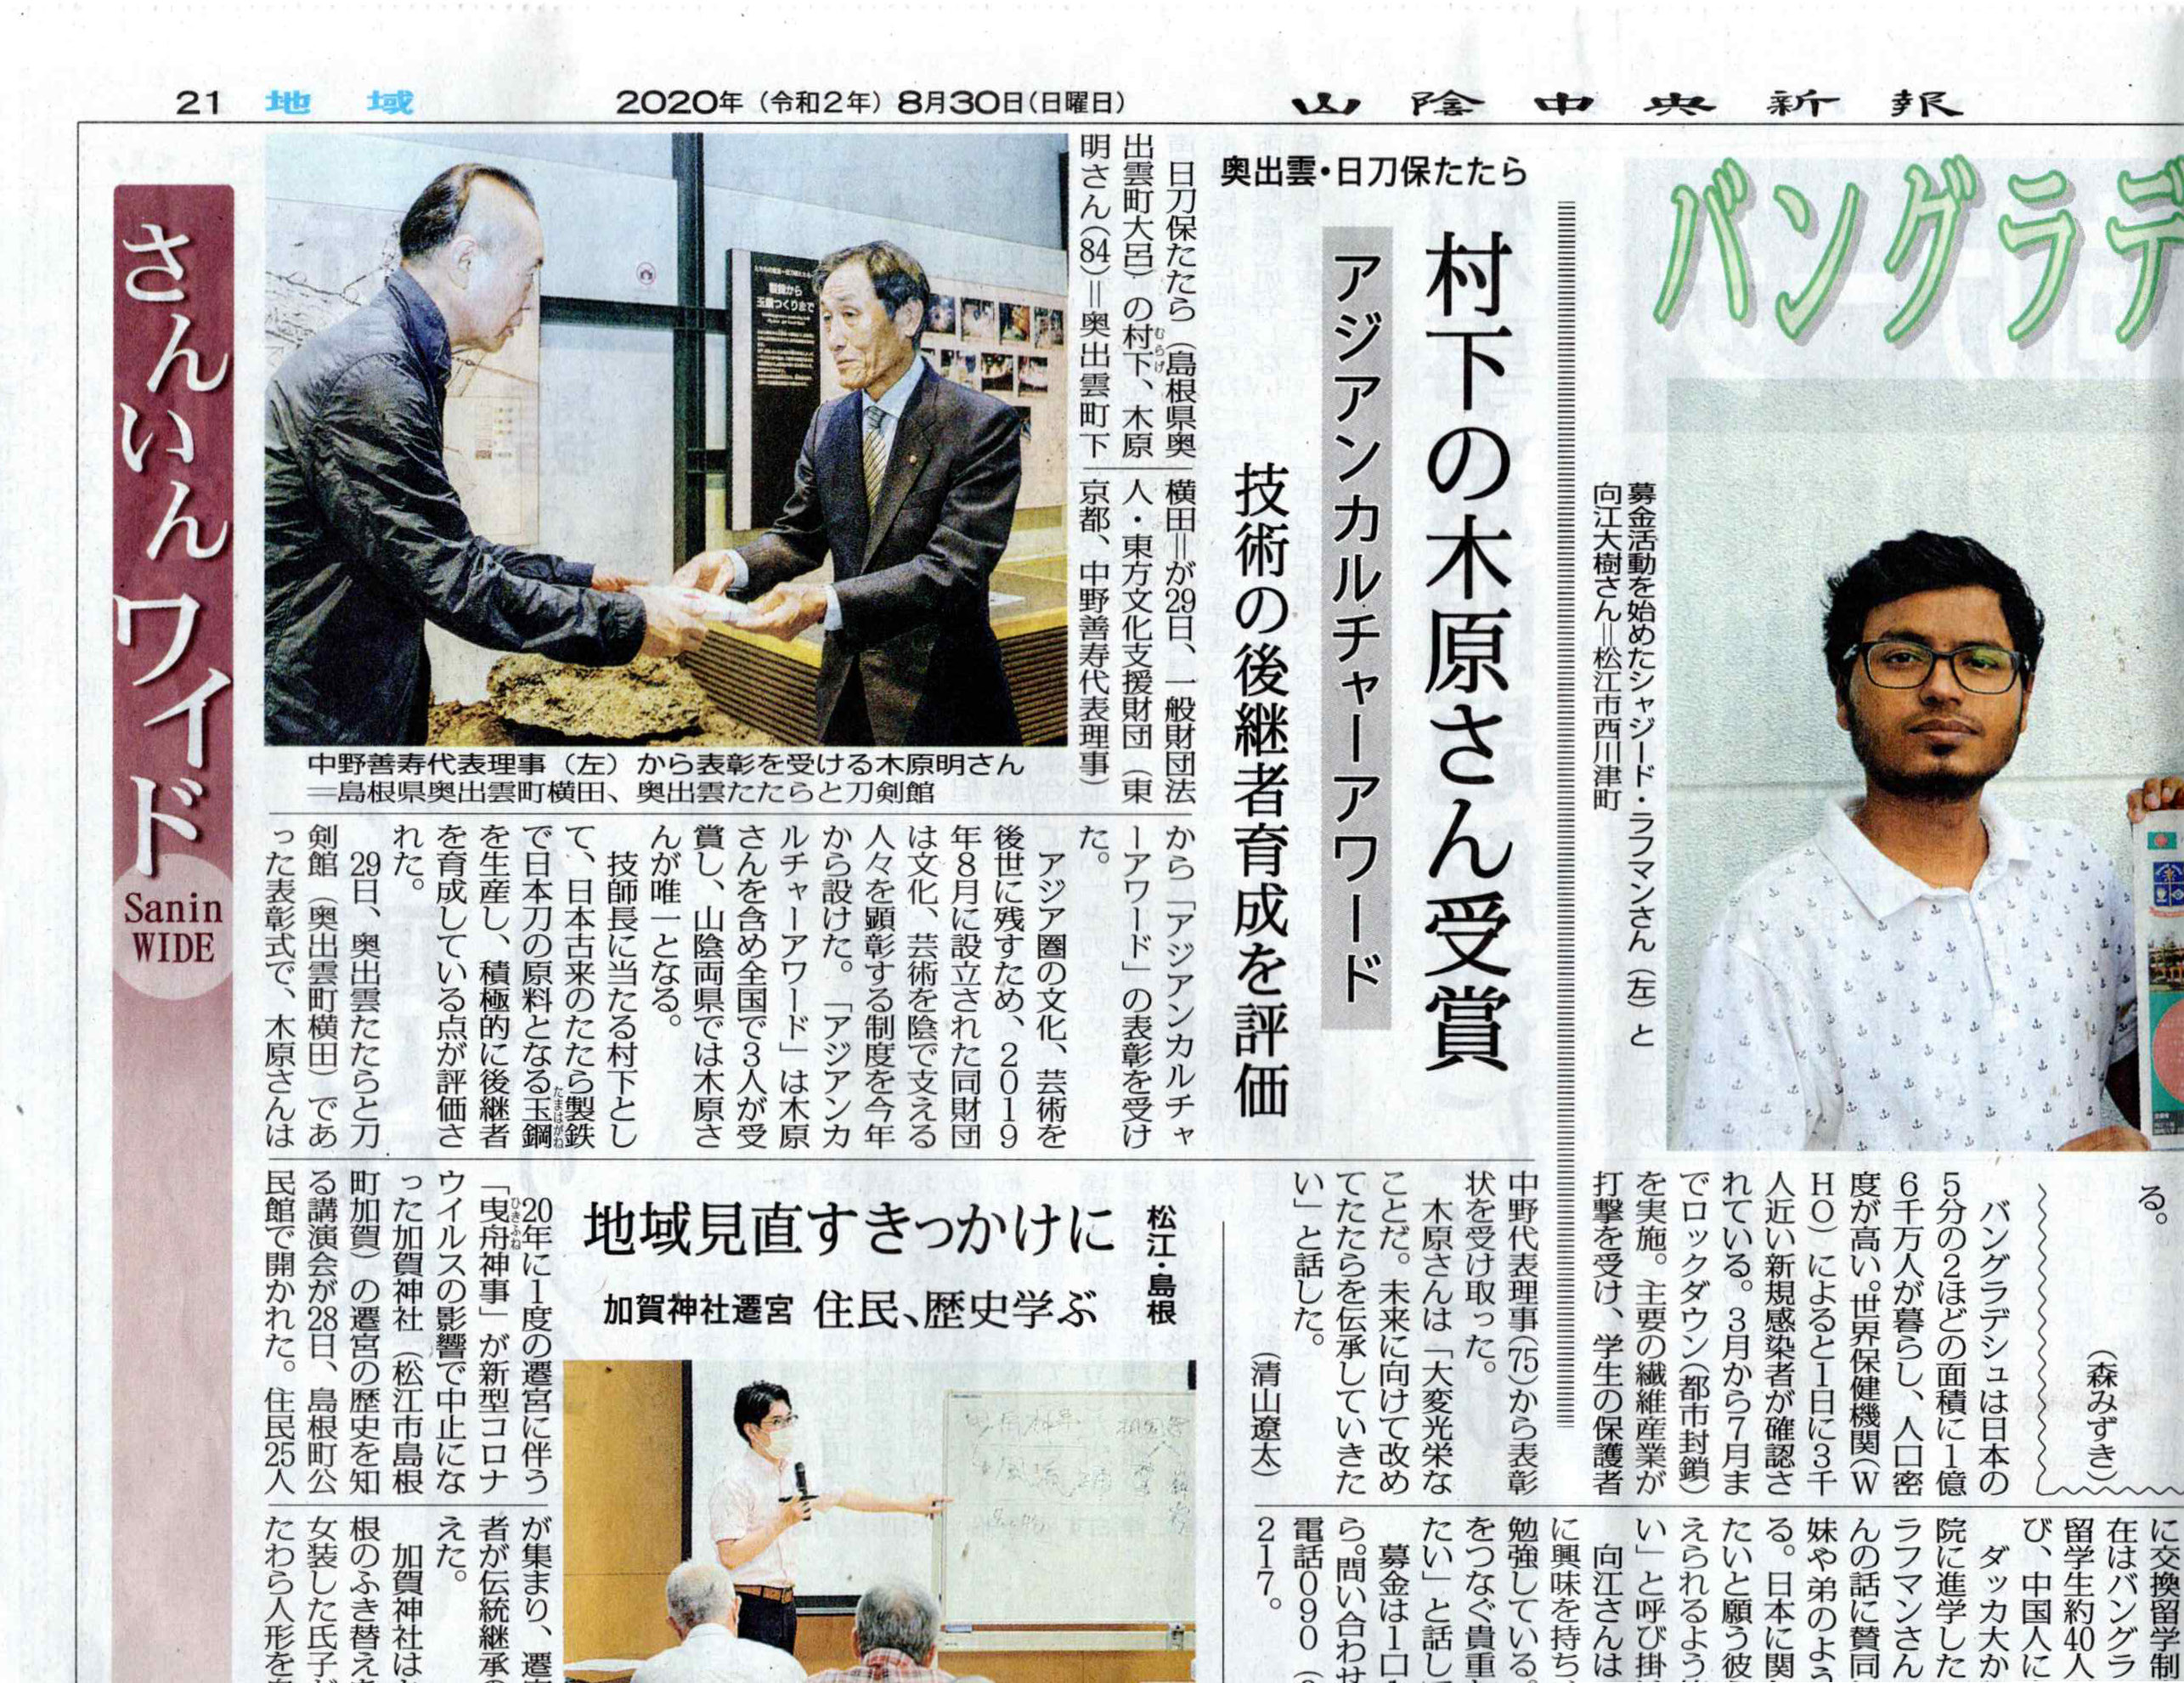 Our Foundation and our Award, the Asian Culture Award (ACA), were Featured in San-in Chuo Shimpo.